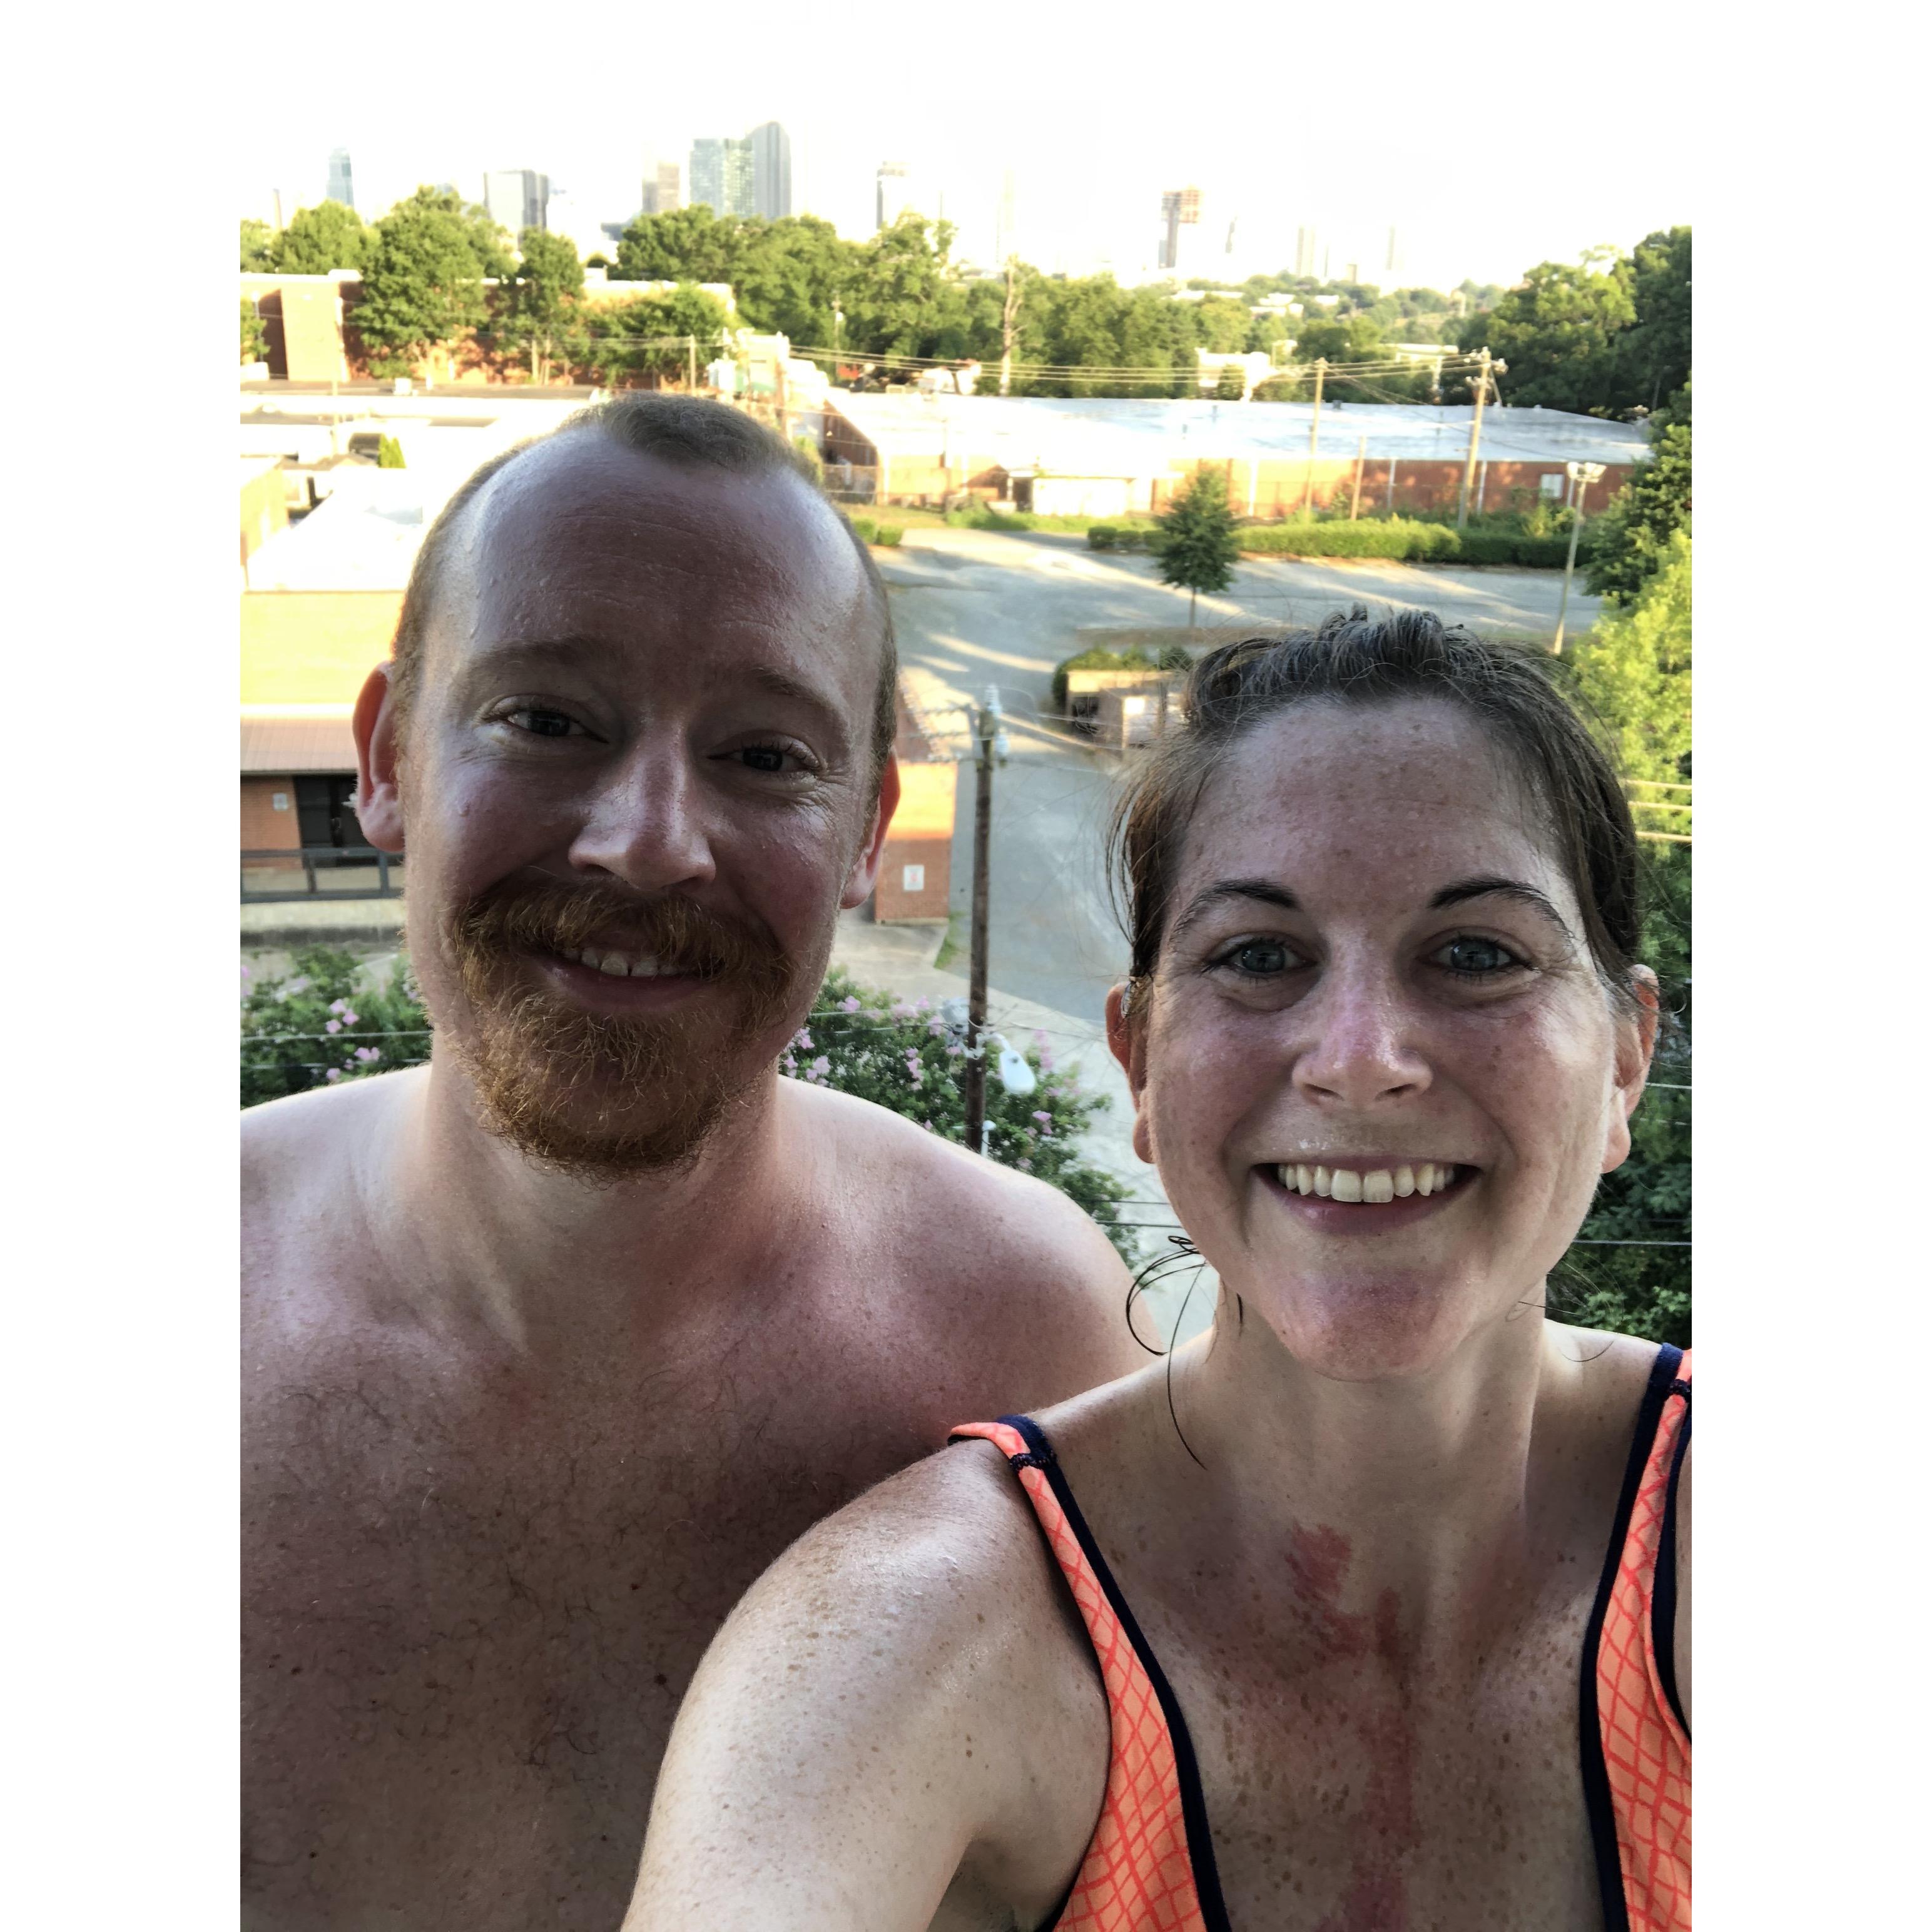 Celebratory photo after we did 108 days in a row of yoga classes with our favorite instructor, Travis Elliot!  What a challenge and it was special we did it together!